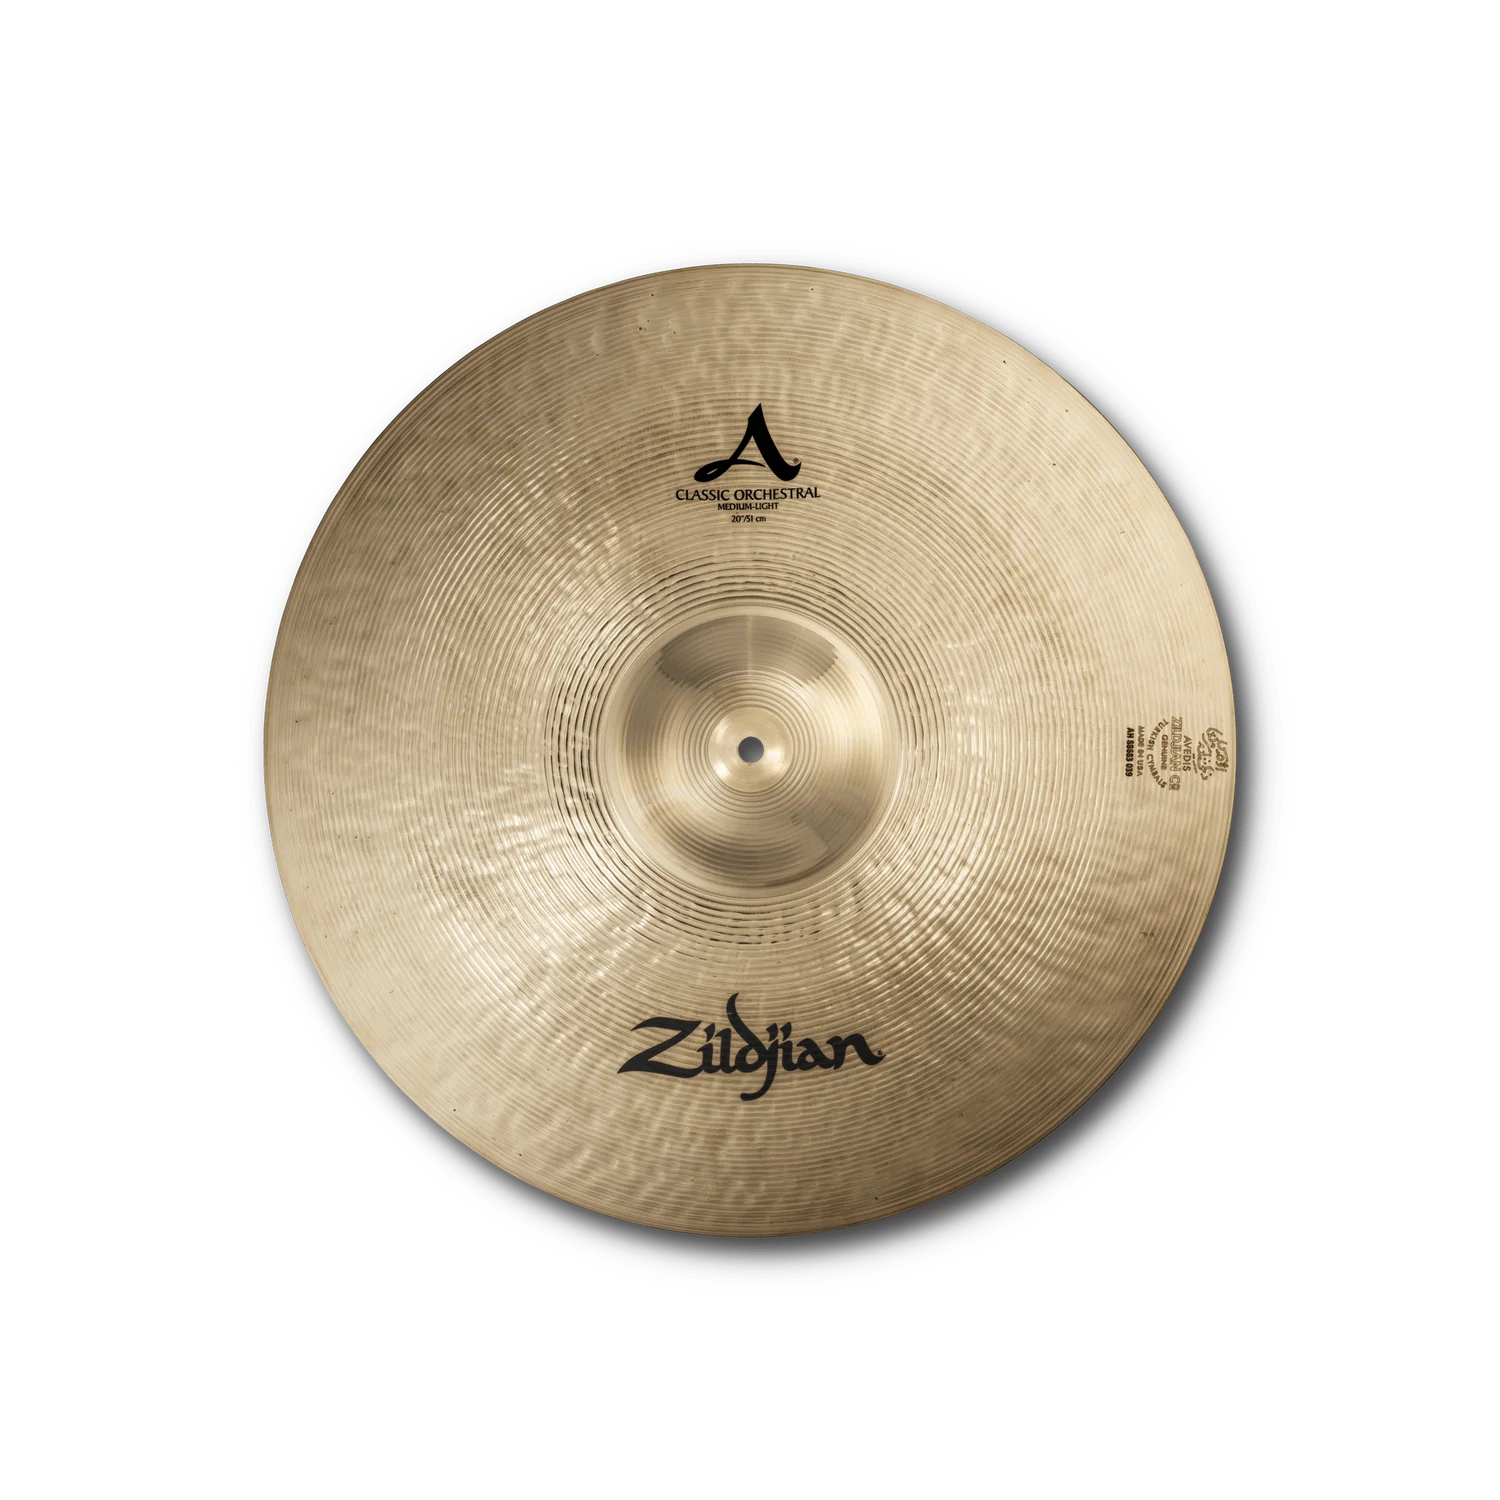 Cymbal Zildjian A Family - A Classic Orchestral Selection - Medium Light, Pairs - A0771 - Việt Music